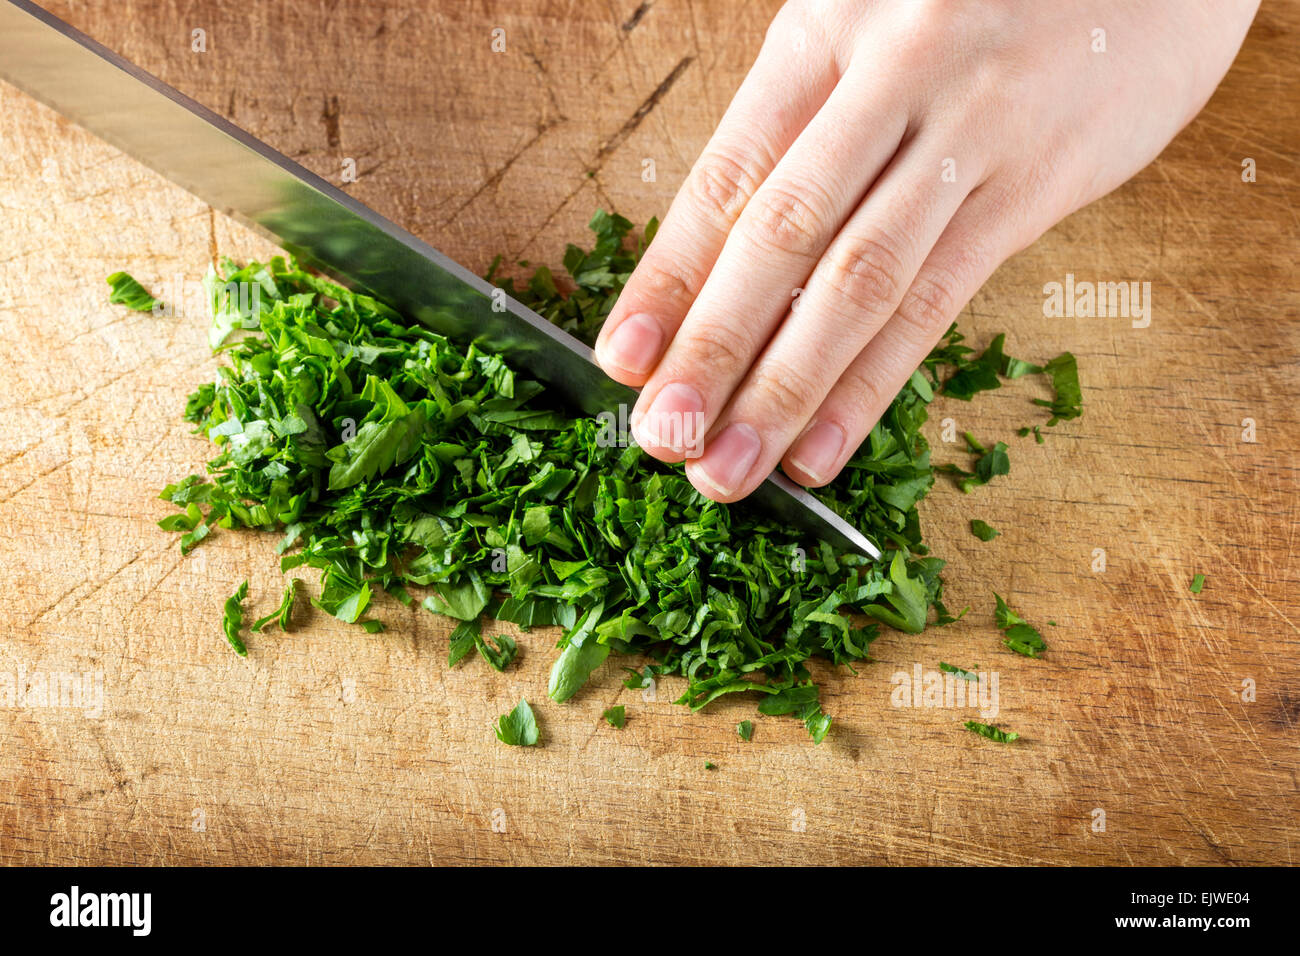 Female hands chopping fresh parsley on wooden board Stock Photo